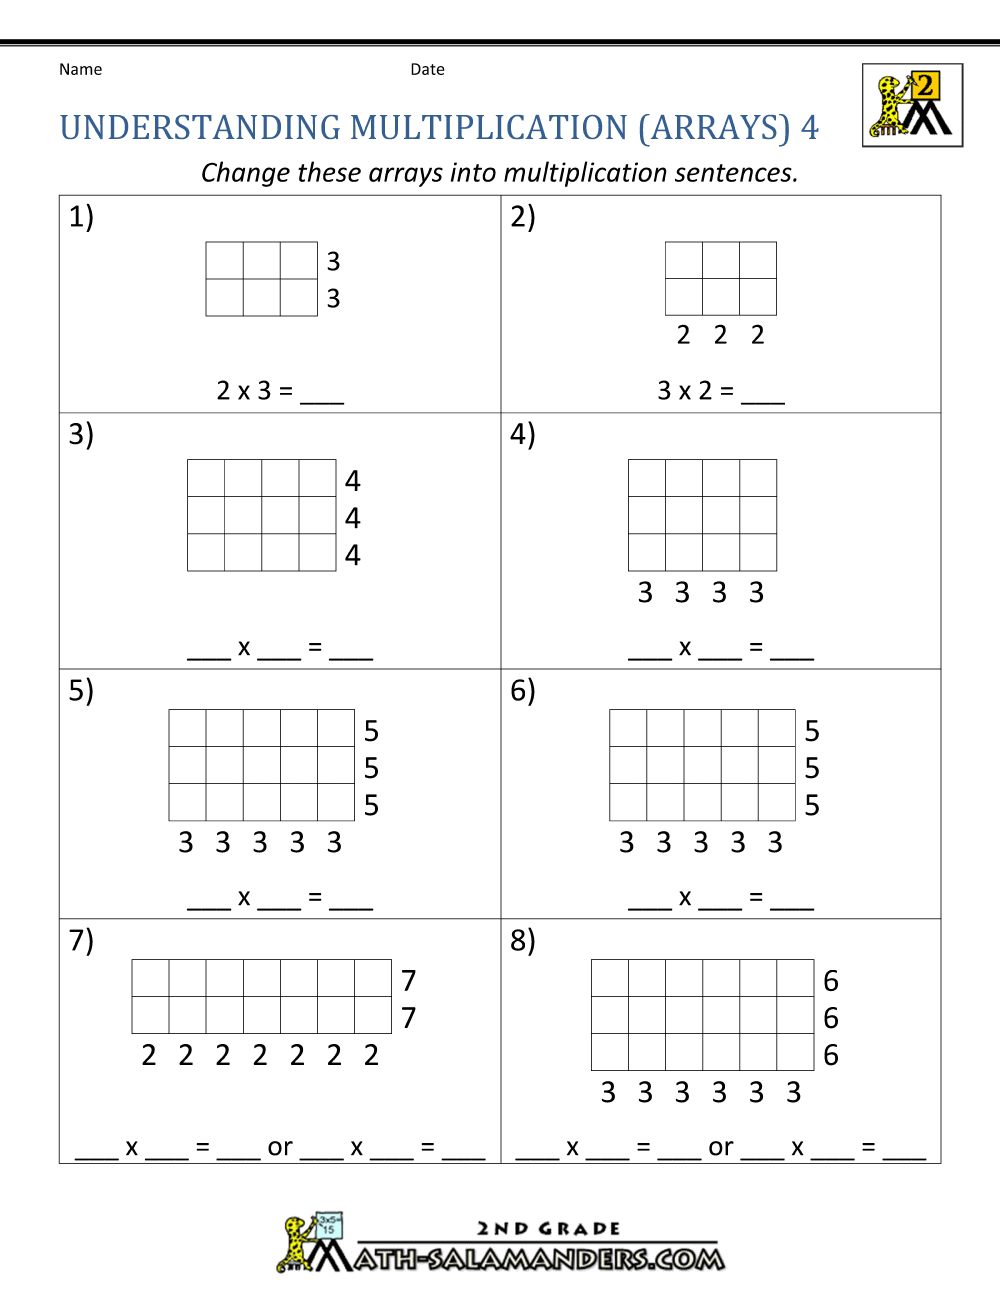  arrays multiplication Sentence worksheet With Answer Key Download Top 39 multiplication With 